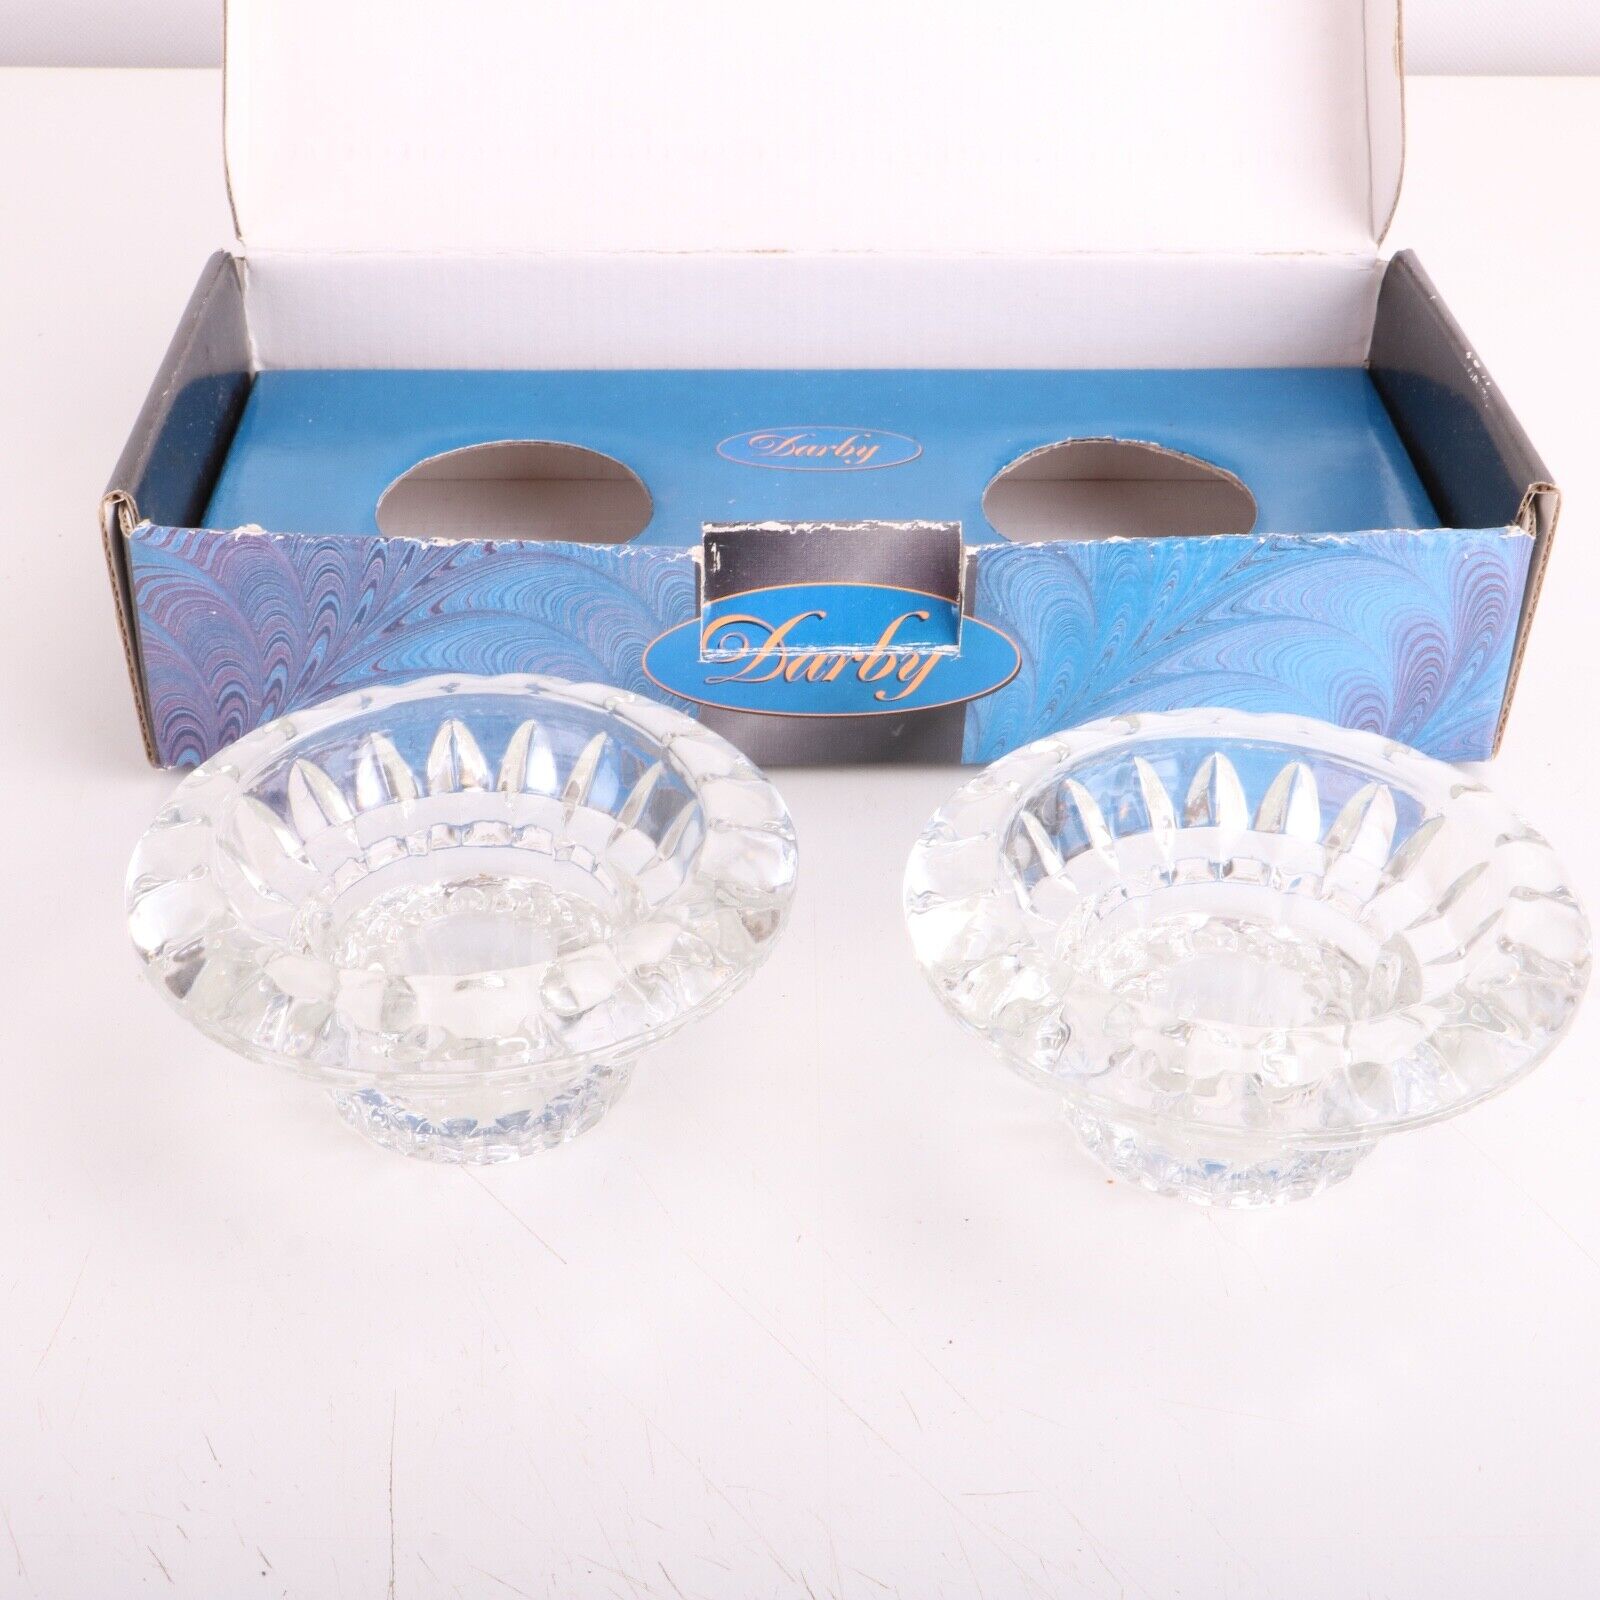 Vintage Darby Crystal Candleholder Set (2) Candleholders With Box 